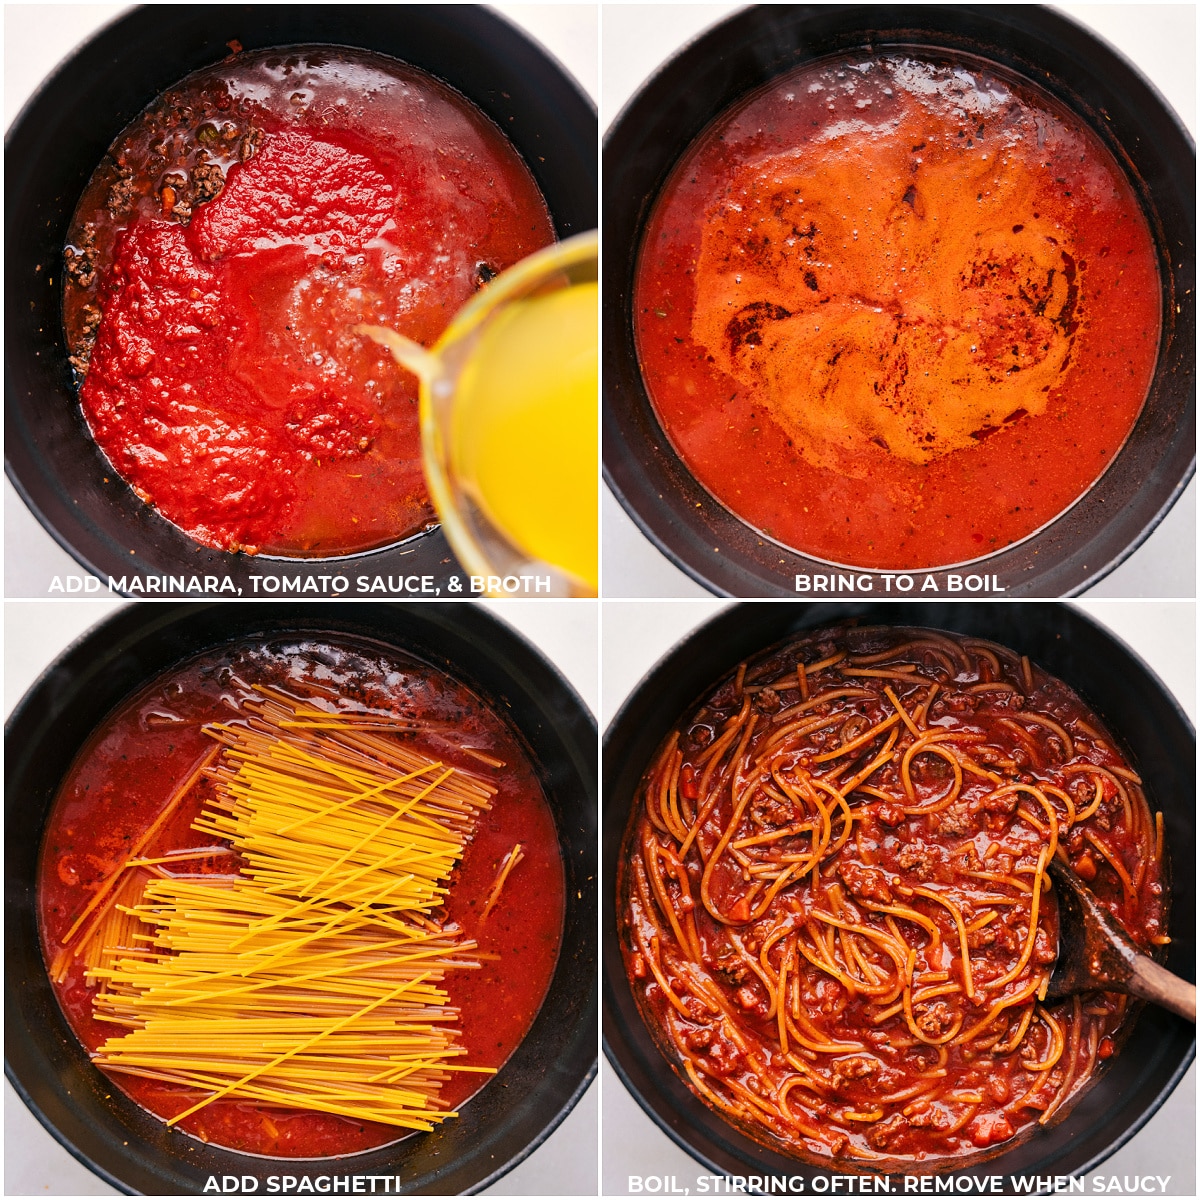 Marinara, tomato sauce, broth, and the pasta being added to the pot for this recipe.